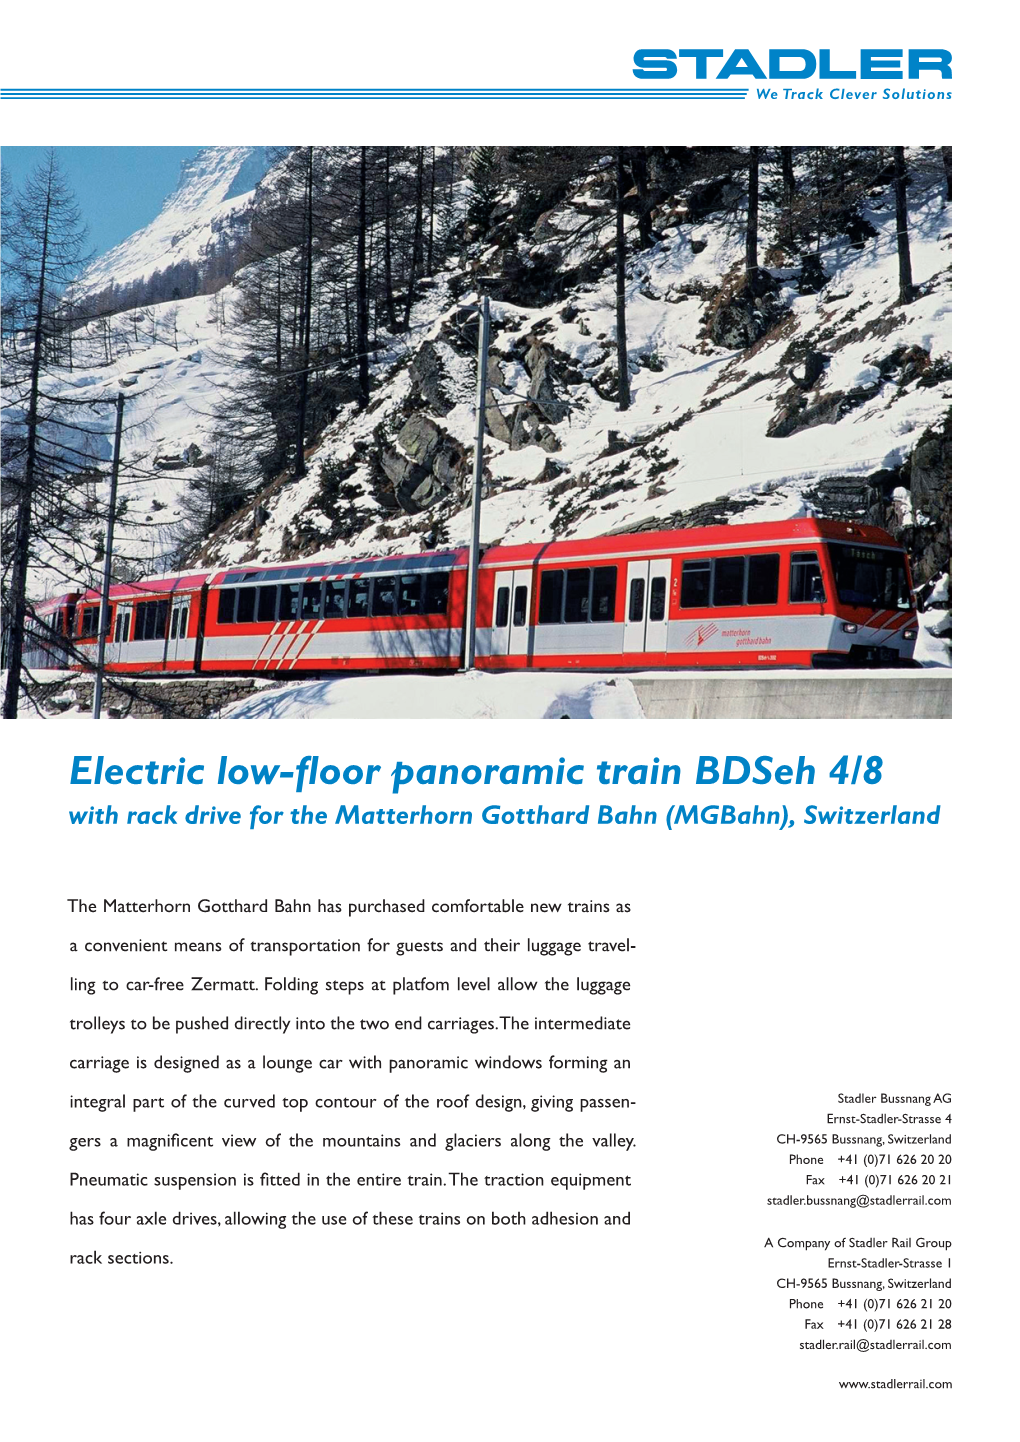 Electric Low-Floor Panoramic Train Bdseh 4/8 with Rack Drive for the Matterhorn Gotthard Bahn (Mgbahn), Switzerland